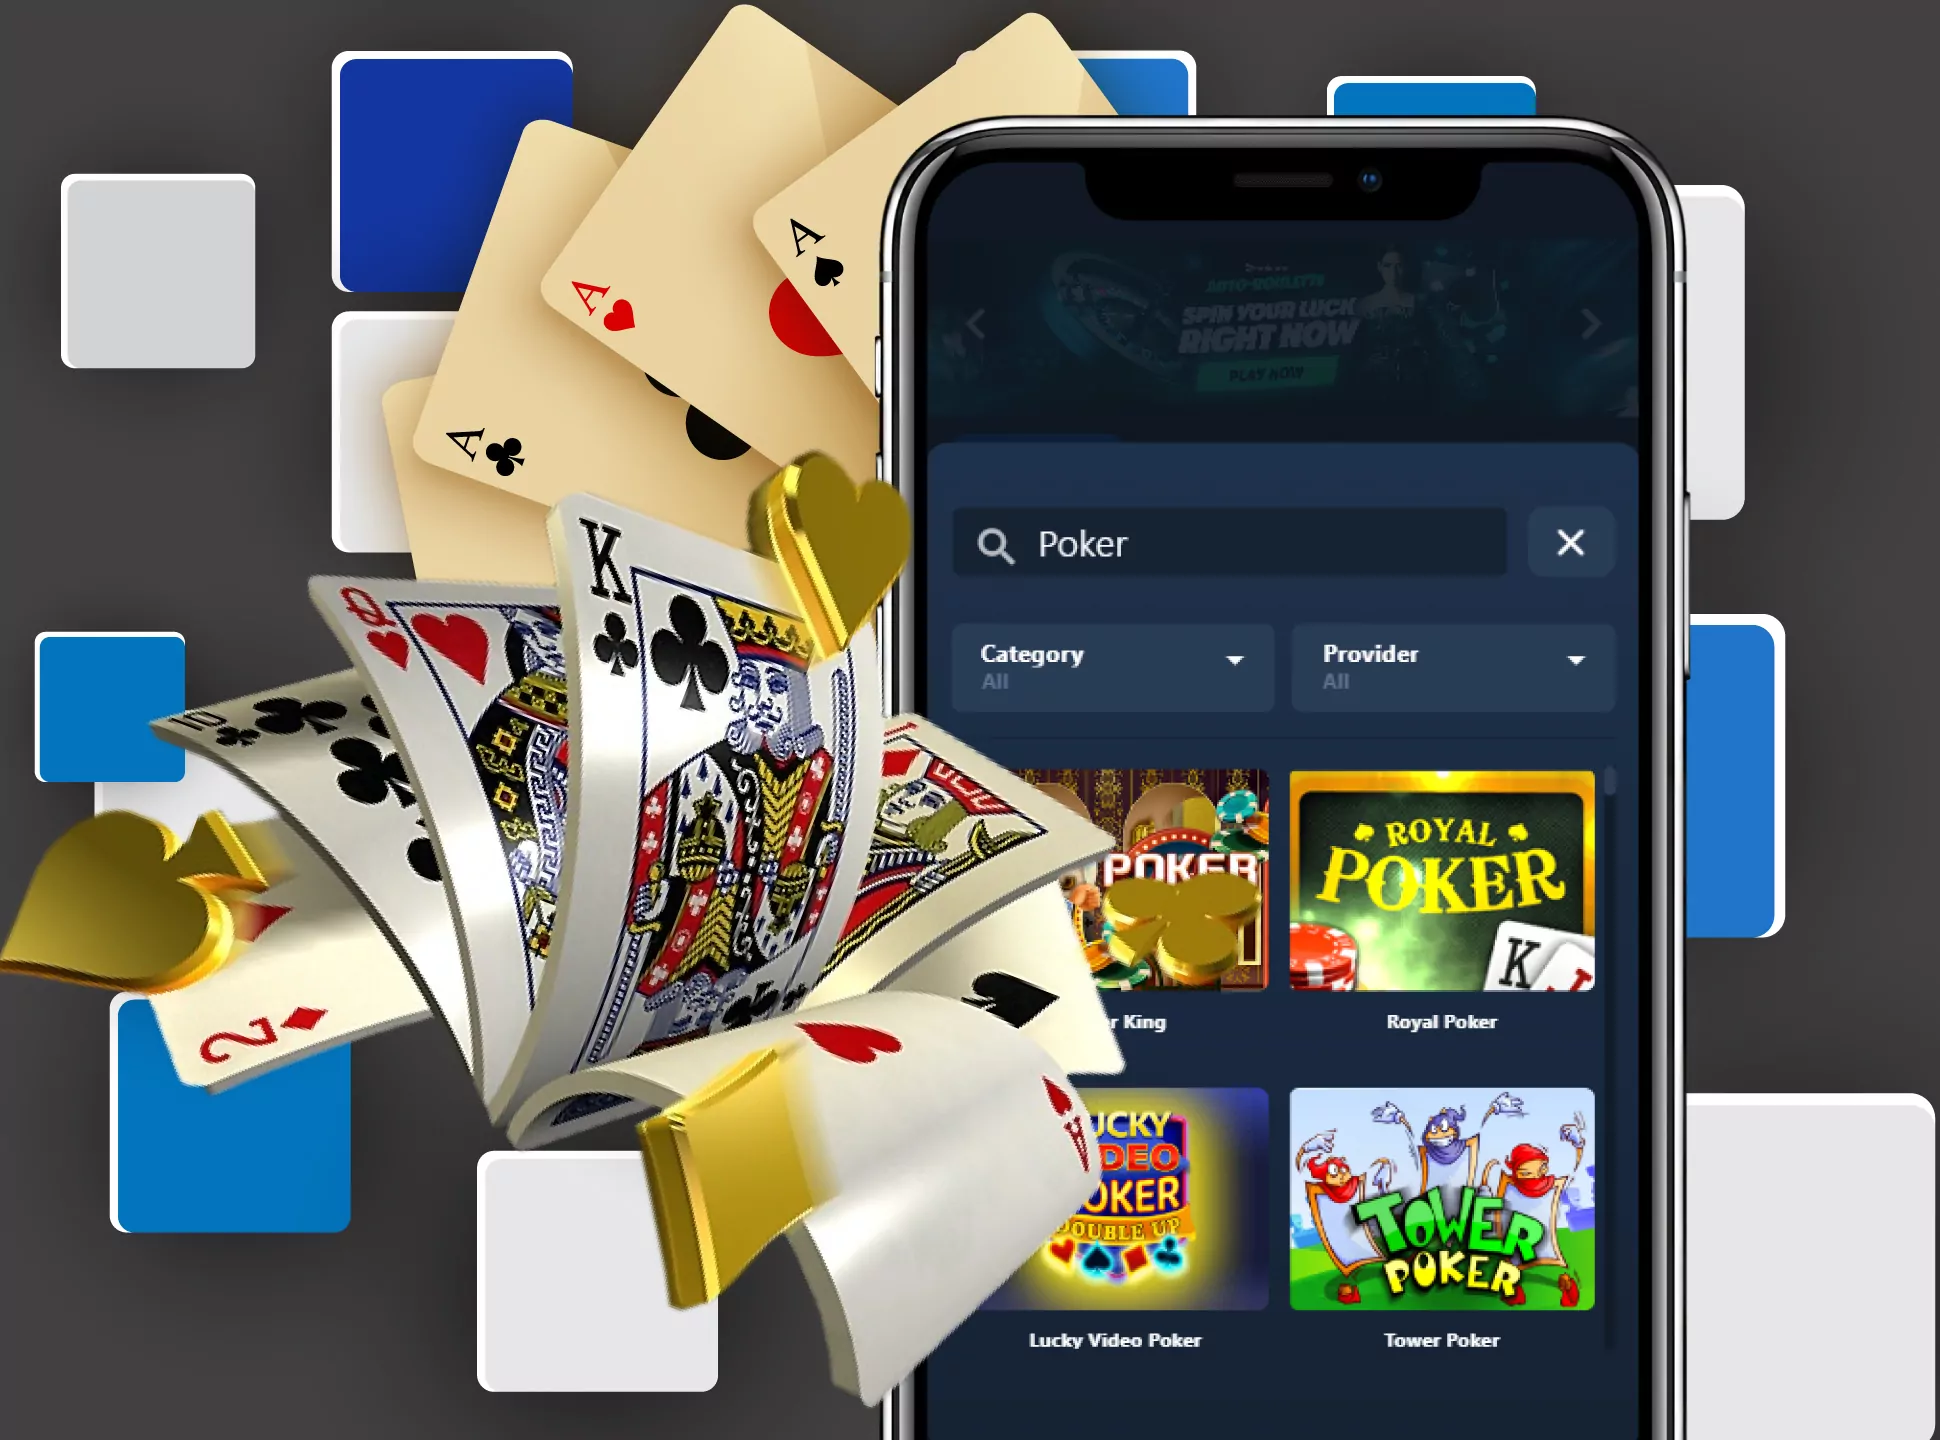 Poker is available for playing in the live setcion.